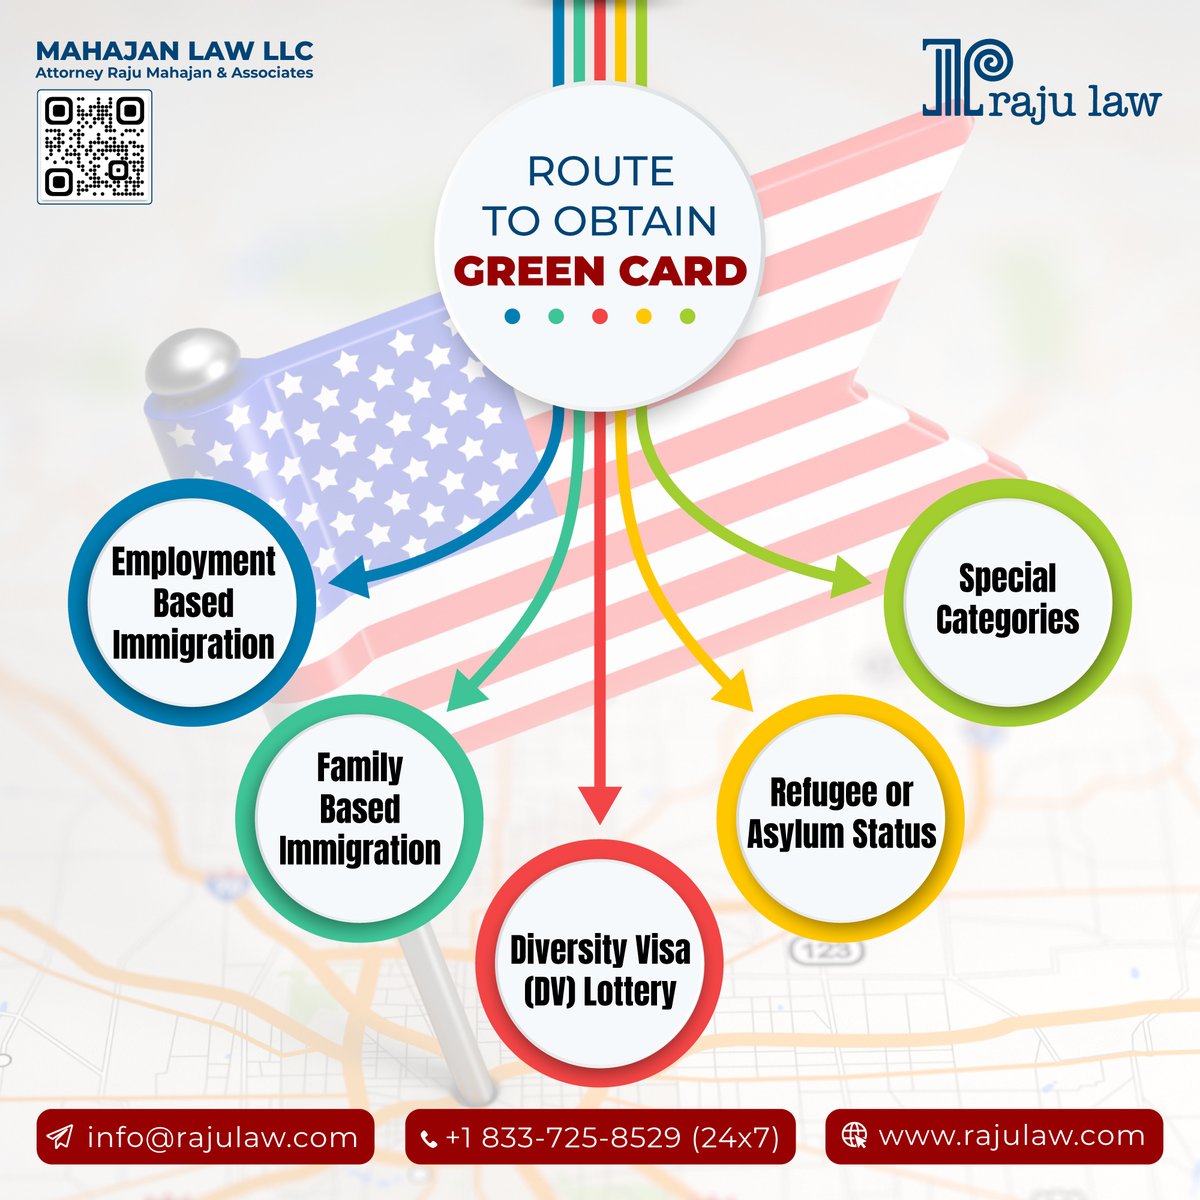 Visit rajulaw.com for more details.

#rajulaw #immigration #USA #LegalAdvice #immigrationlawyer #LegalHelp #immigrationconsultant #USImmigration #attorney  #greencard #visitorvisaexpert #ImmigrationLaw #ImmigrationProcess #Citizenship #migration #migrationservices